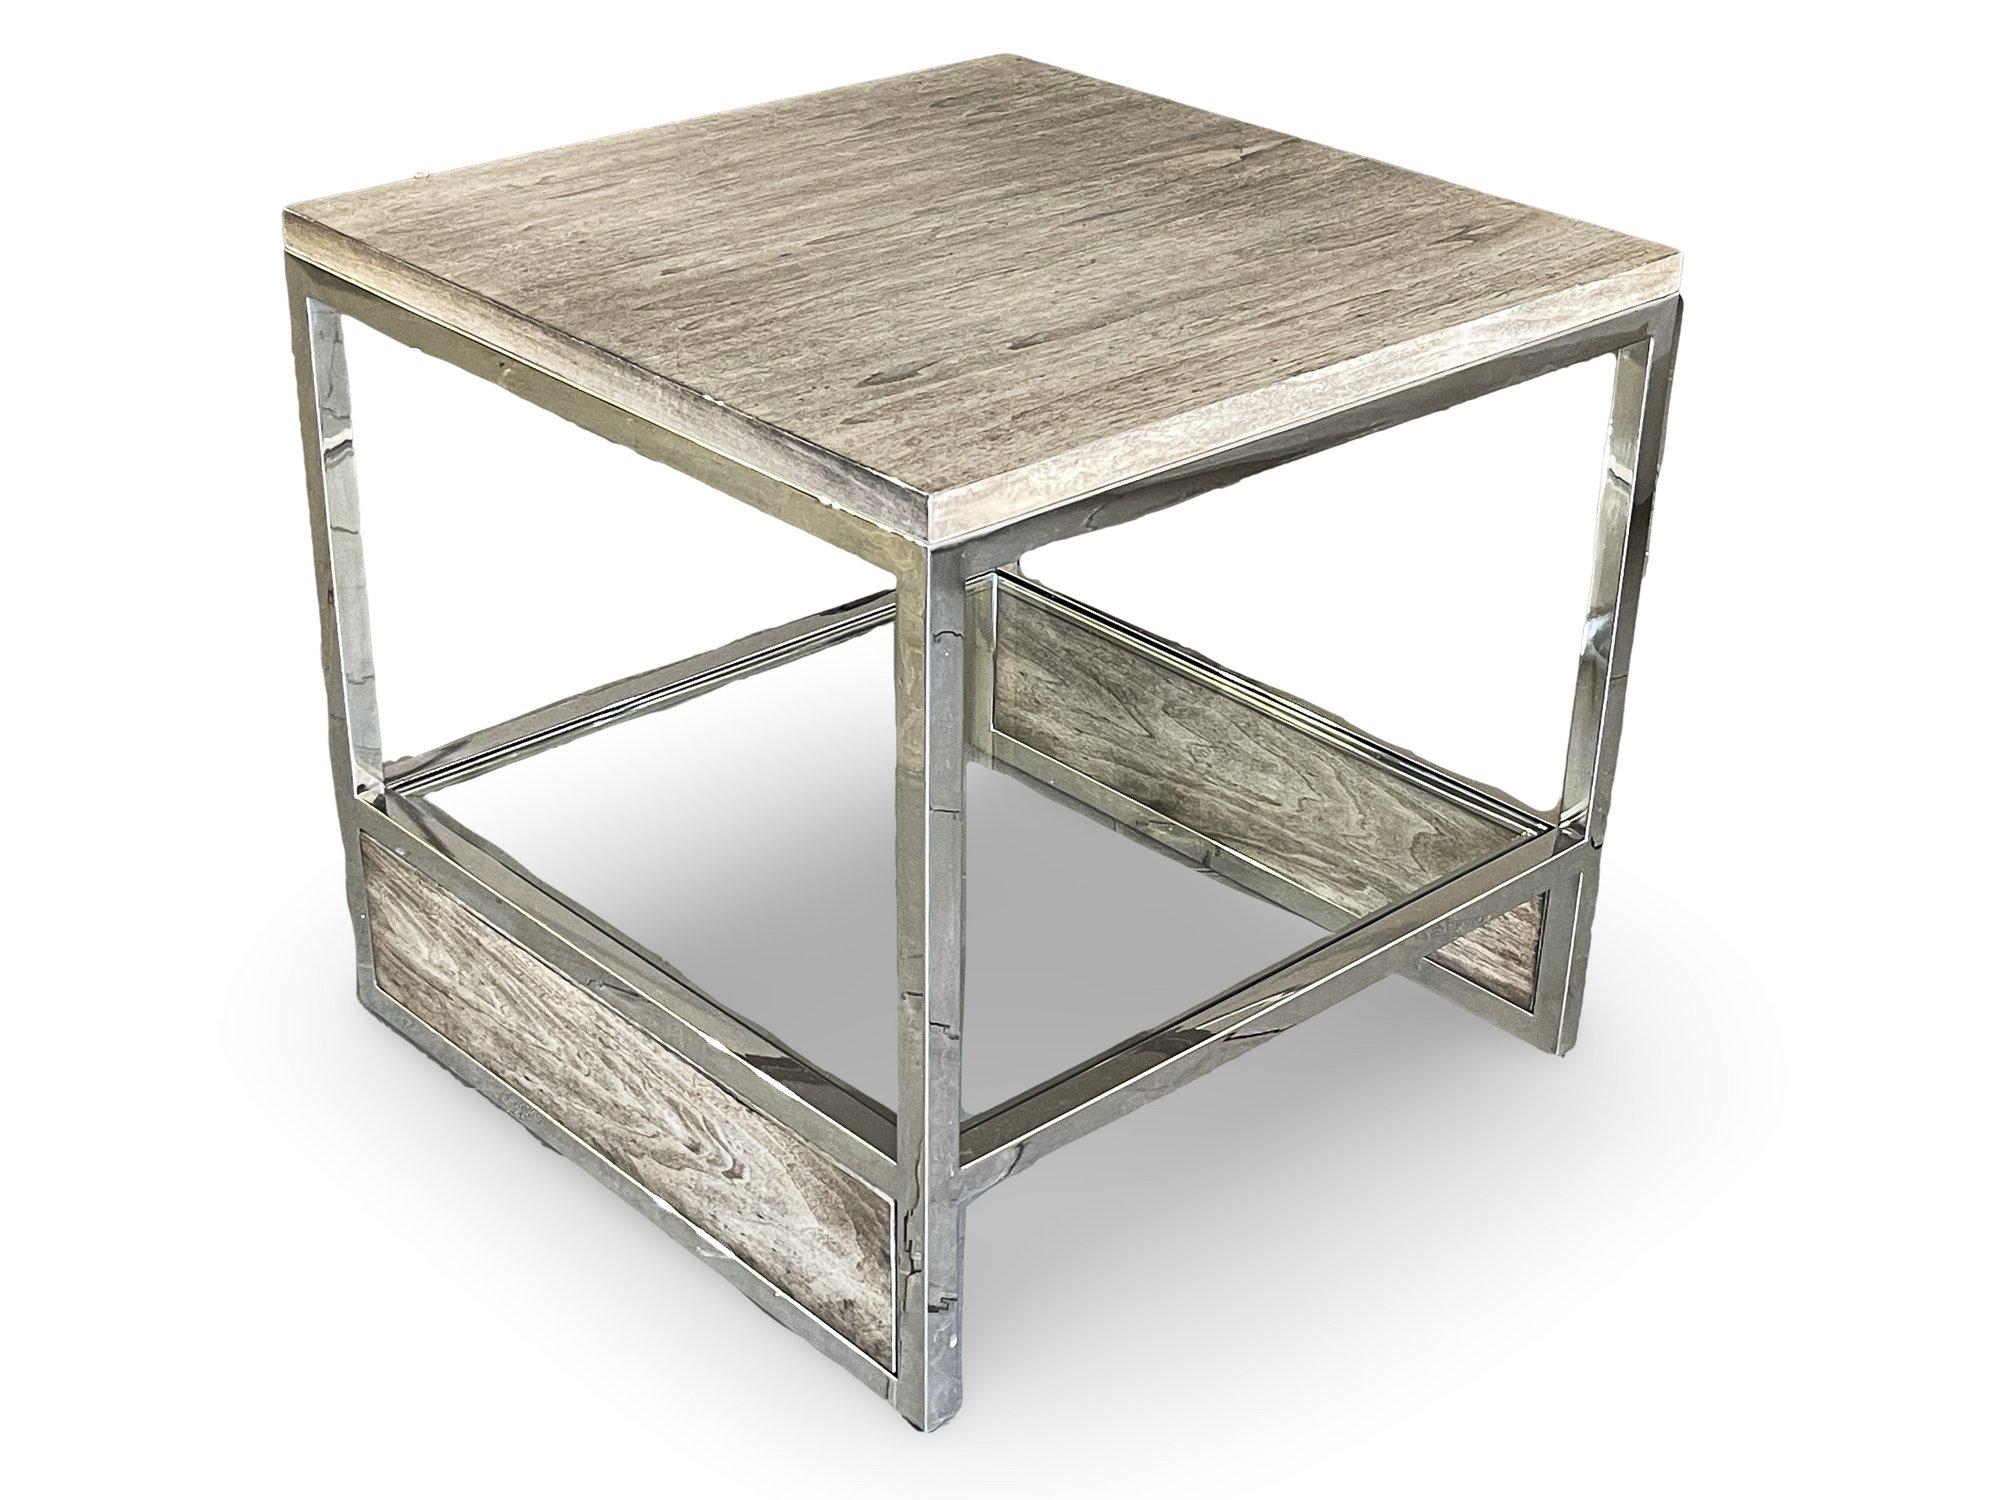 Distressed Top Chrome Frame End Table With Under Shelf